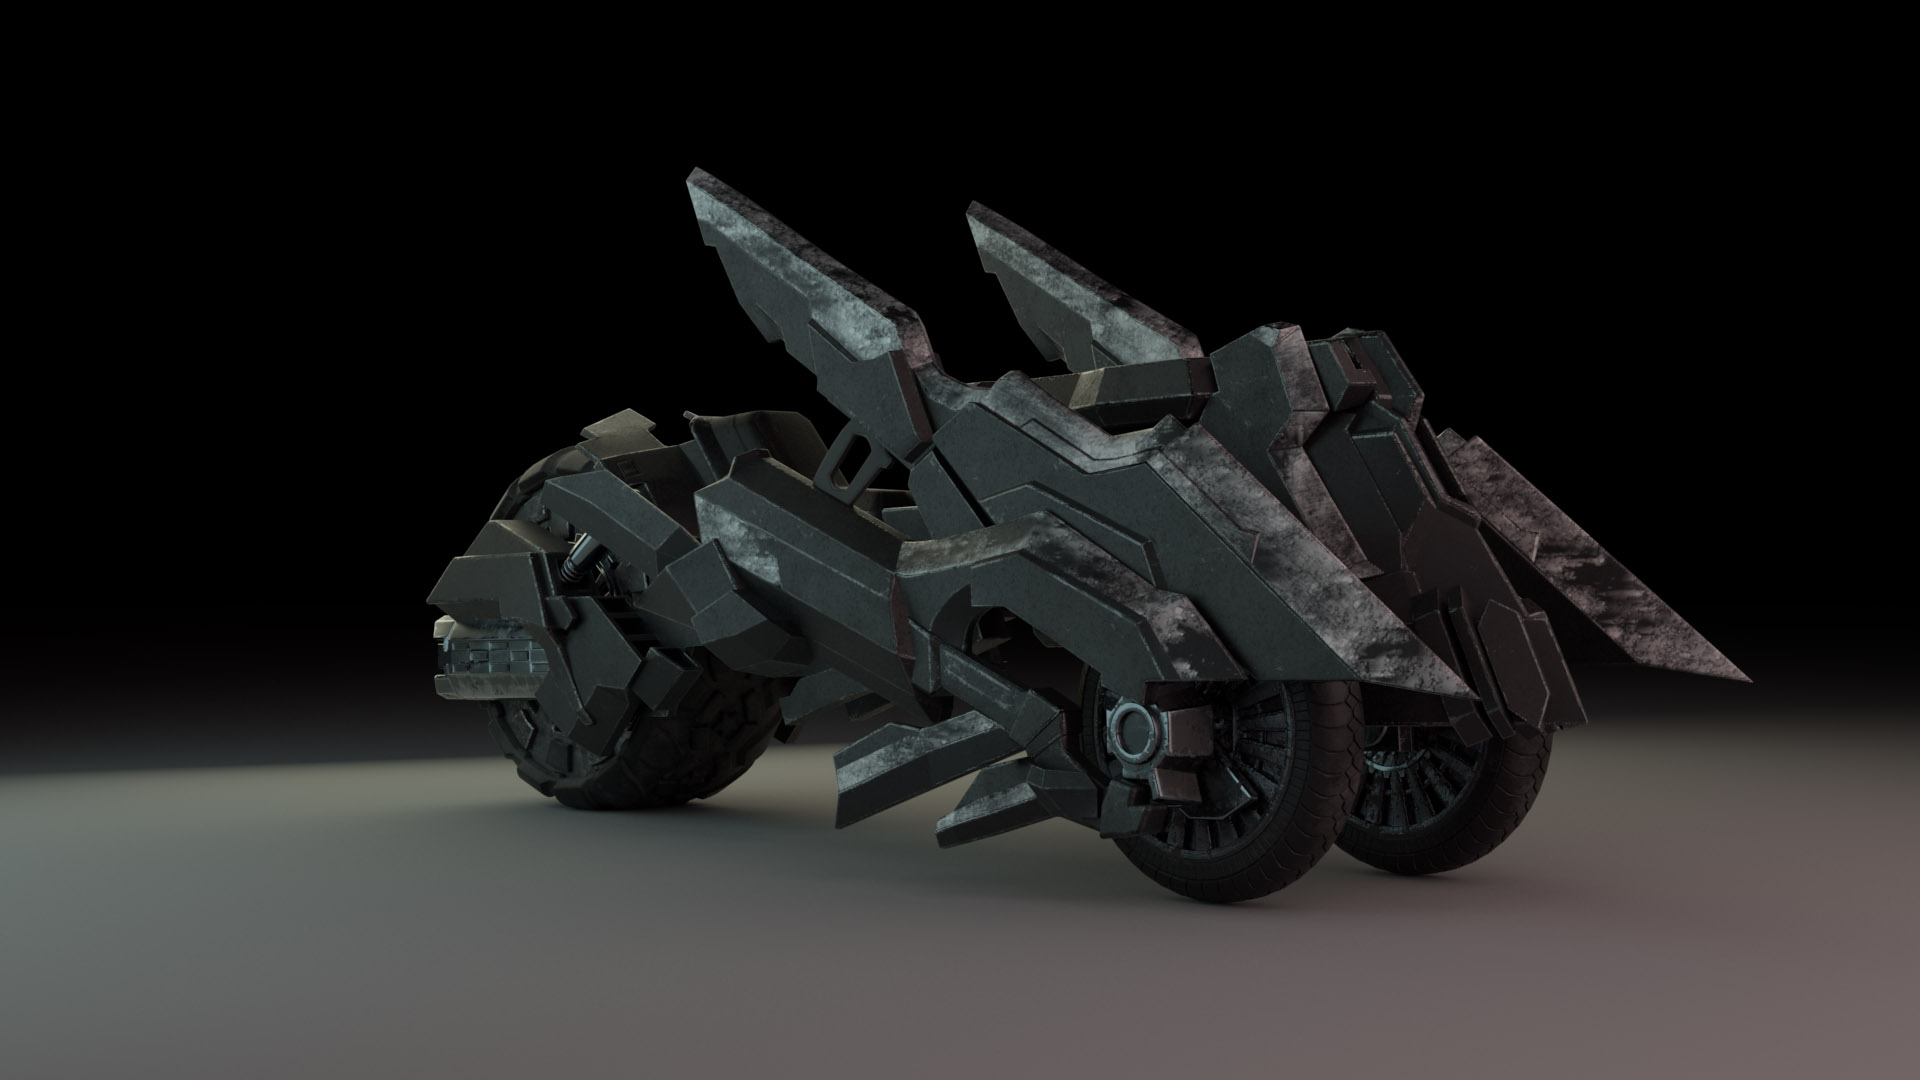 The motorcycle from “Black Rock Shooter: The Game” three quarters